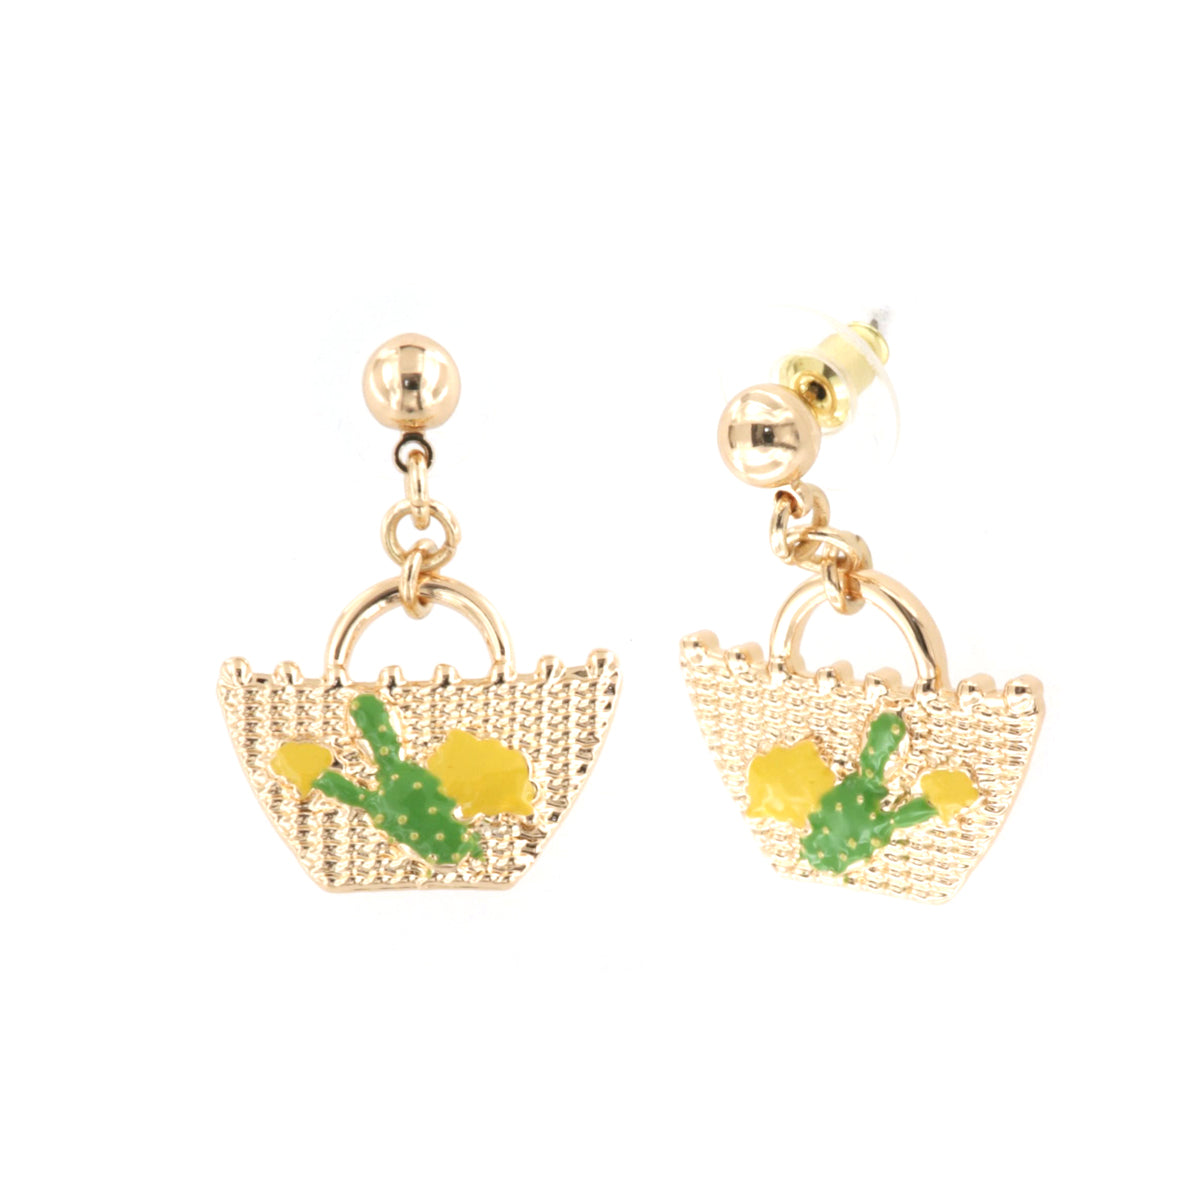 Metal earrings with pendant coffa, prickly pear and lemons of Sicily